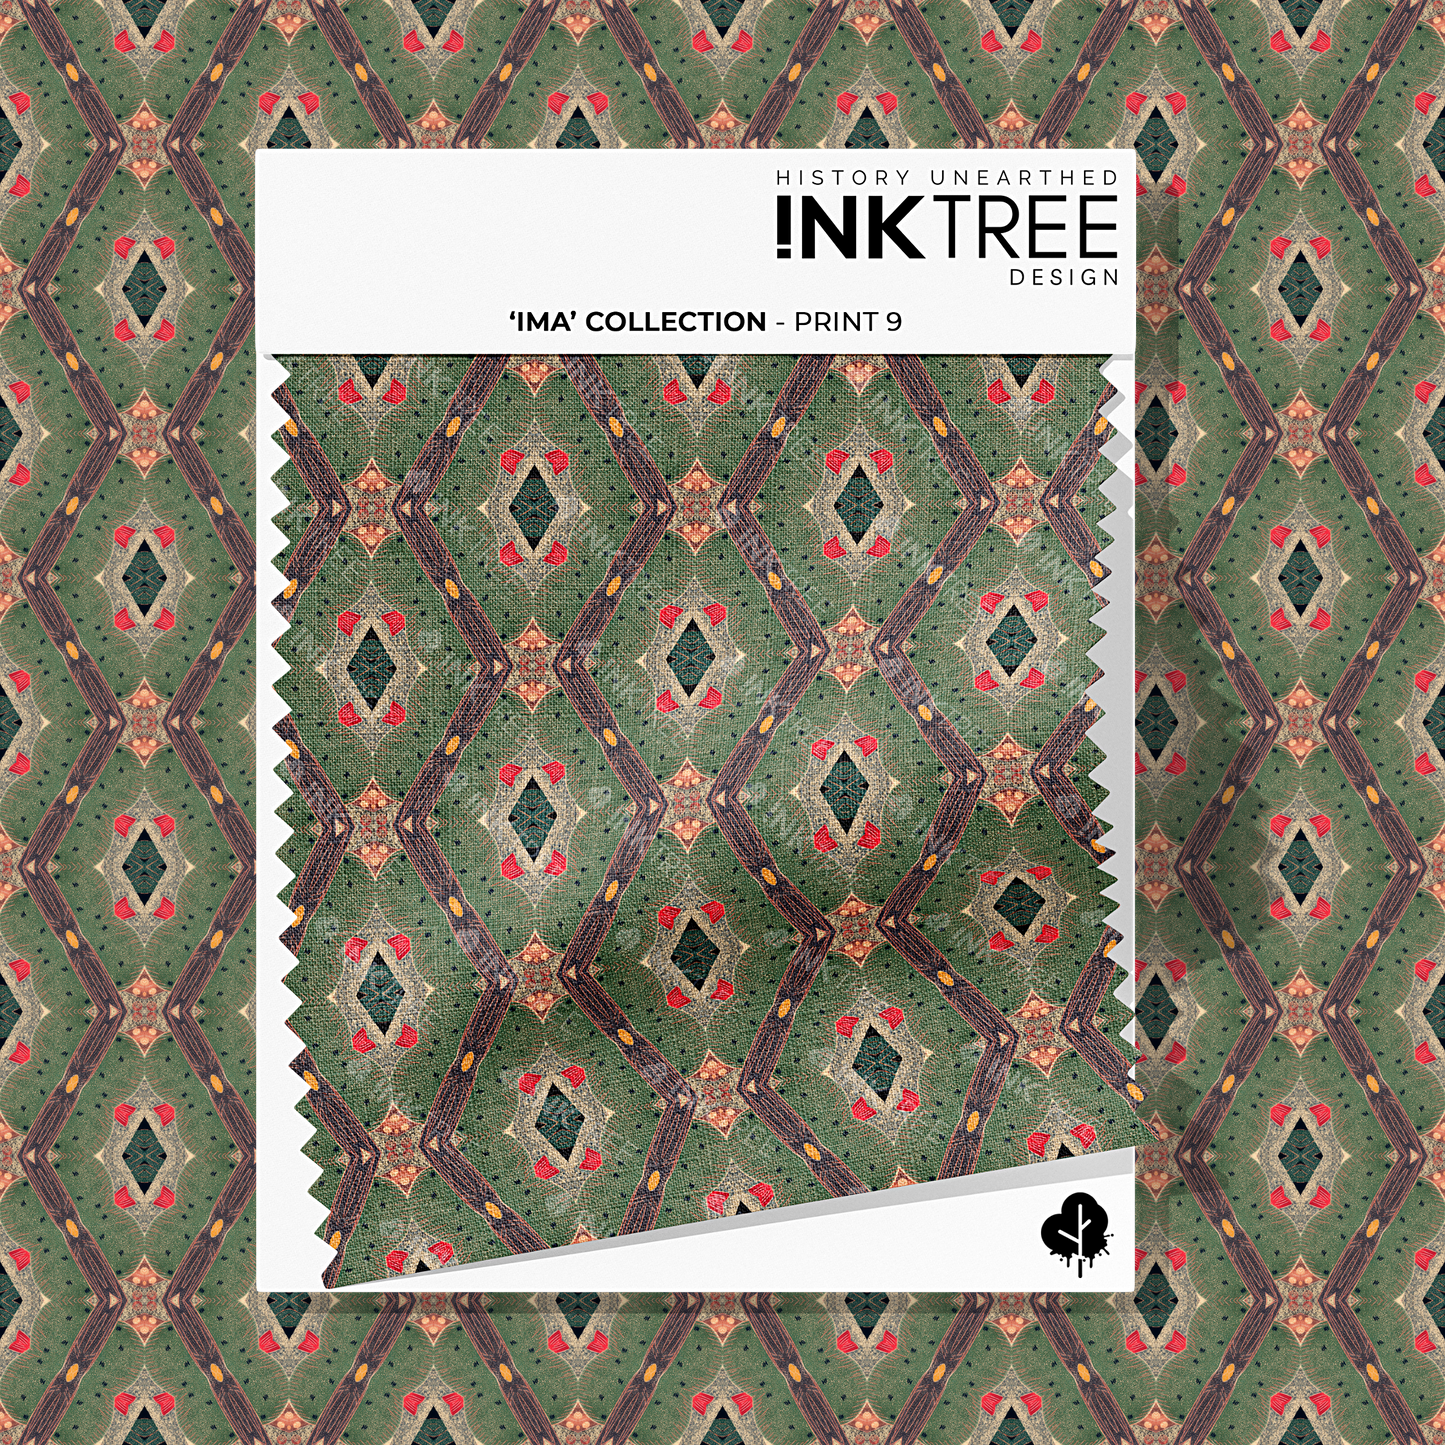 A white card fabric swatch with a gold, black, red, green and white oriental looking pattern and ink tree design logo on it.  There is the same pattern on the background.